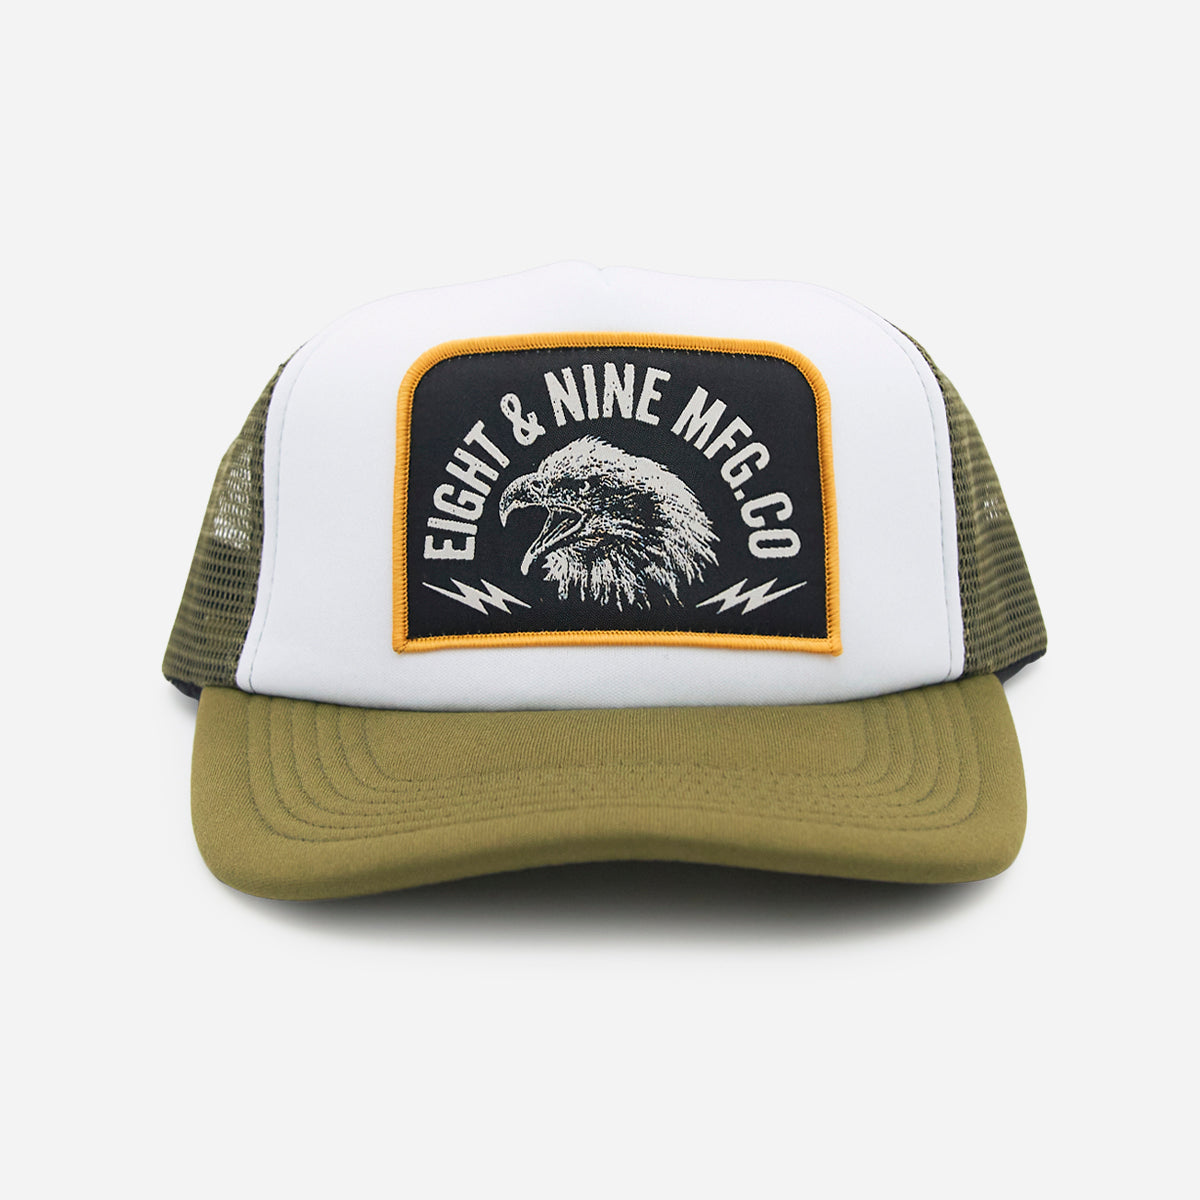 Feel The Trenches Trucker Hat